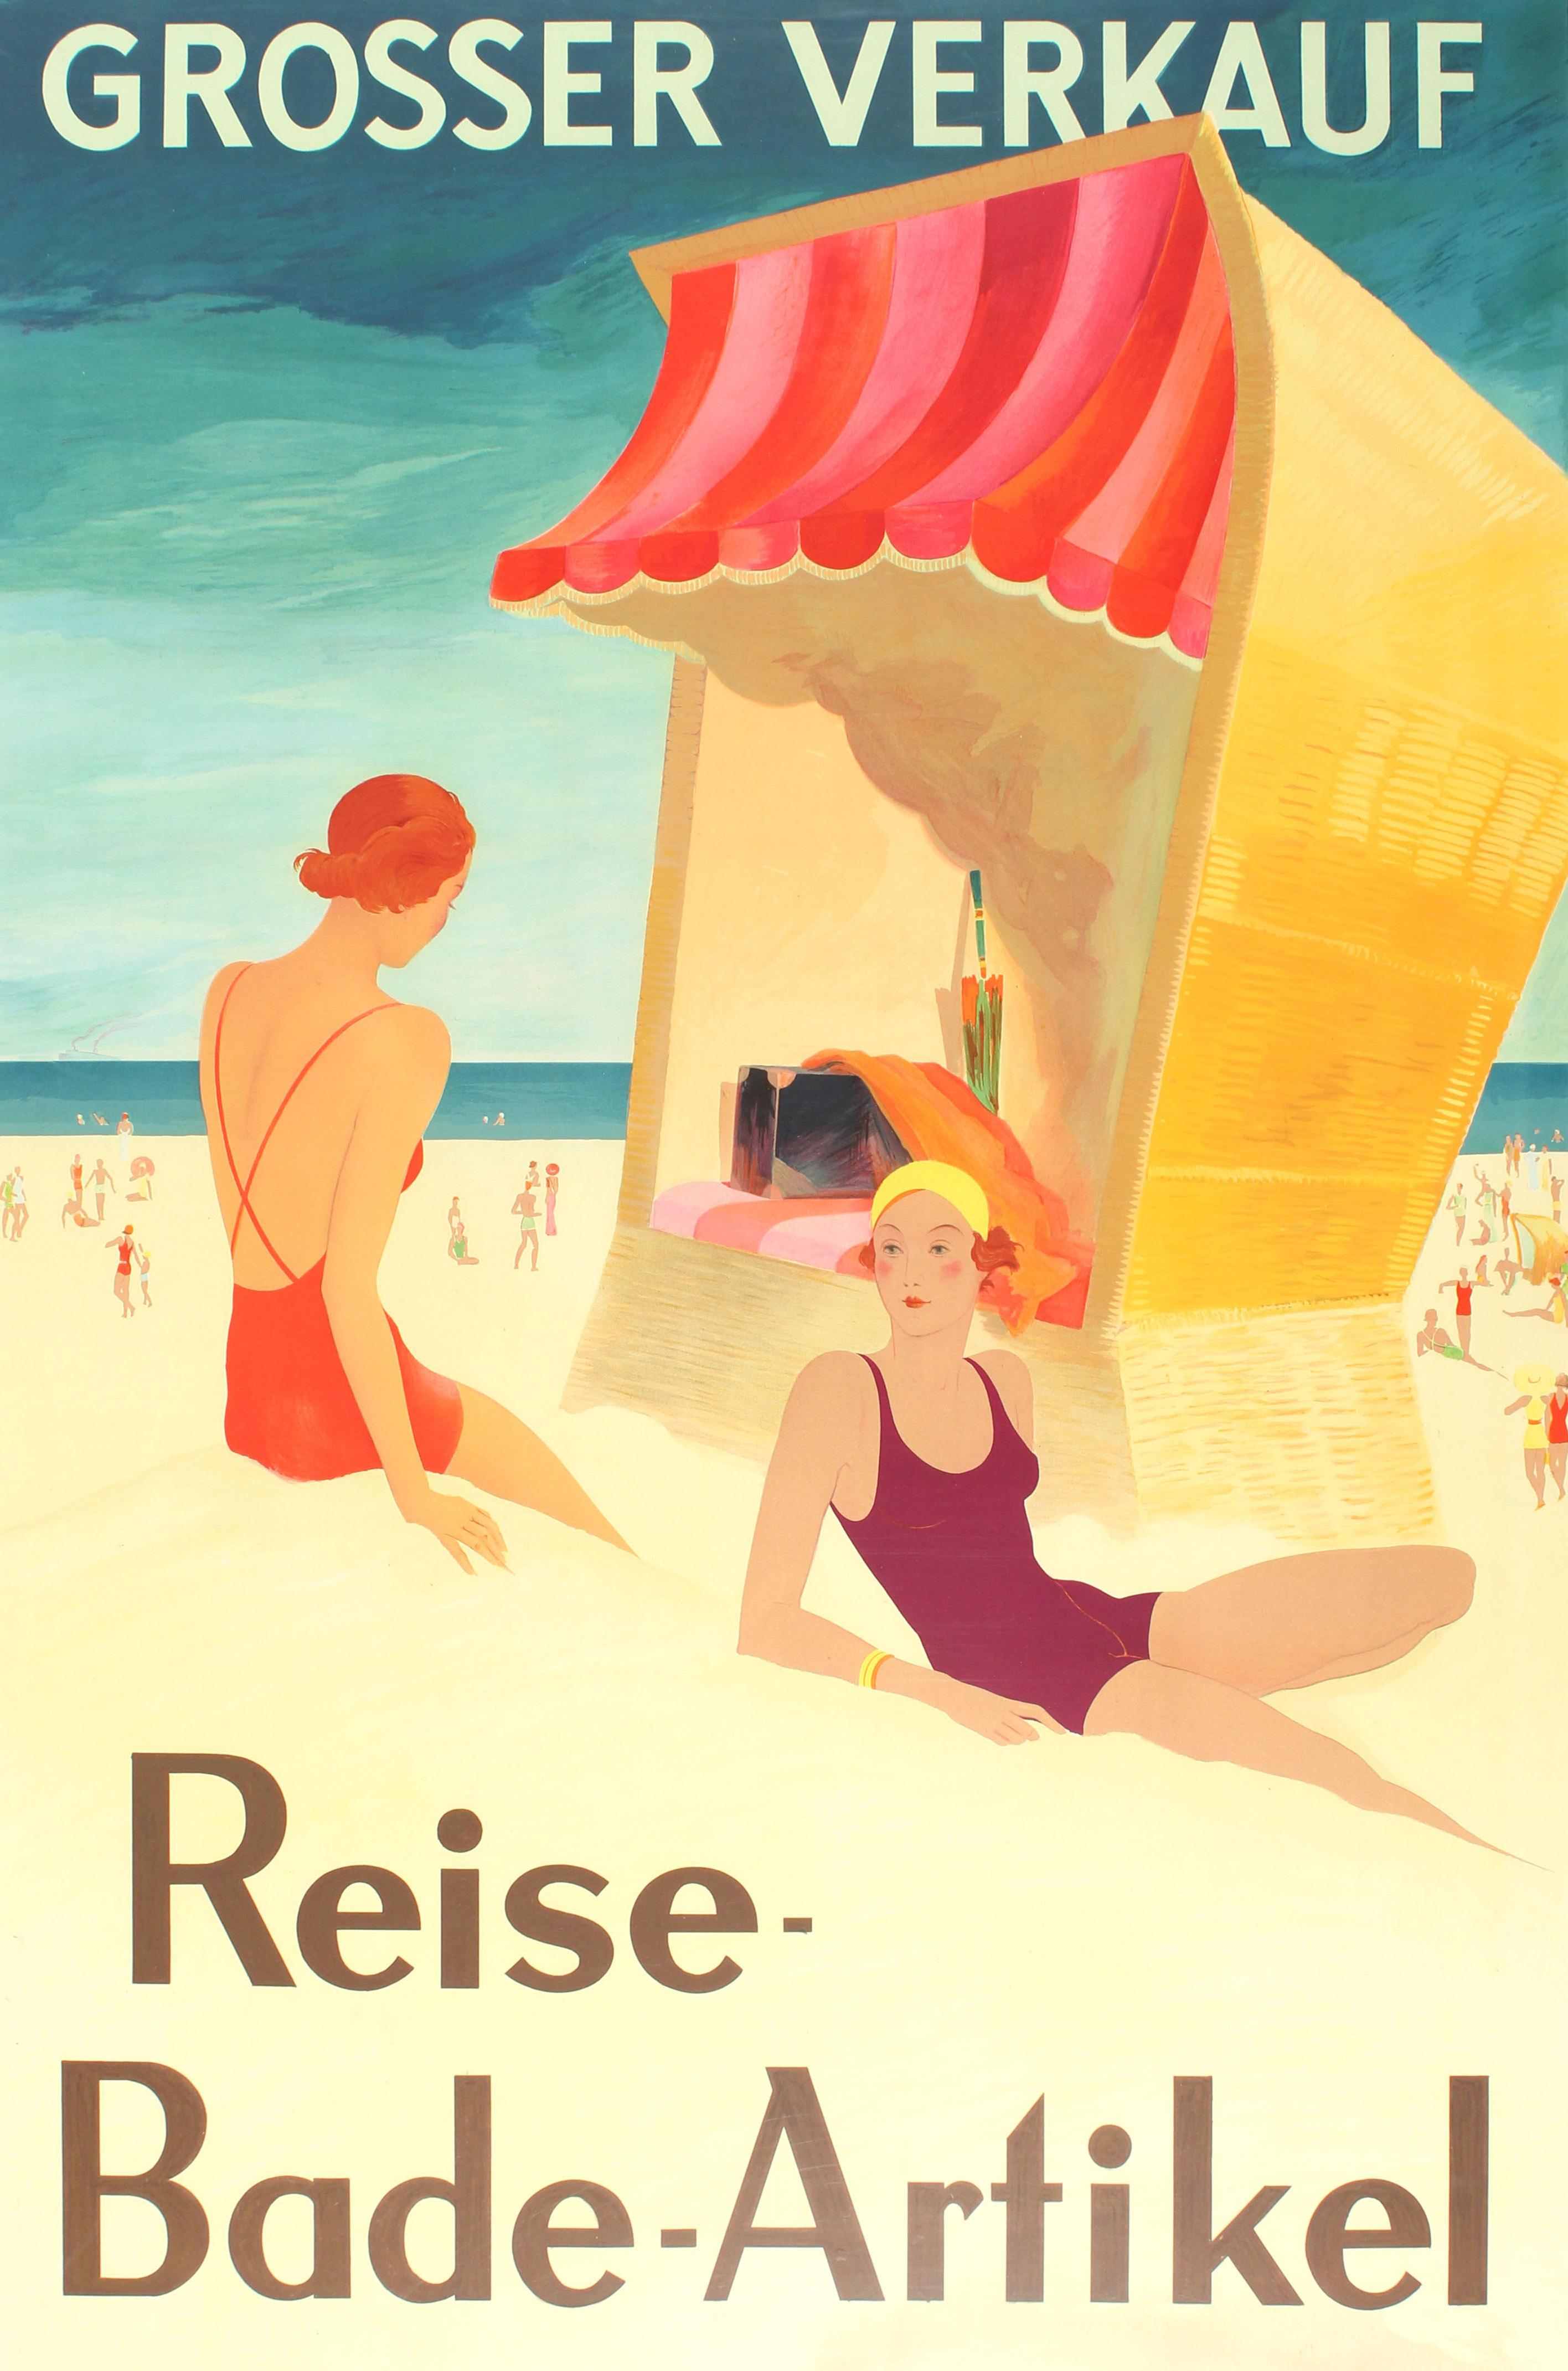 Original vintage advertising poster most likely issued by one the large department stores to promote a big sale of travel, holiday and swimming accessories, the text in German reads: Grosser Verkauf Reise Bade Artikel. Stunning Art Deco style